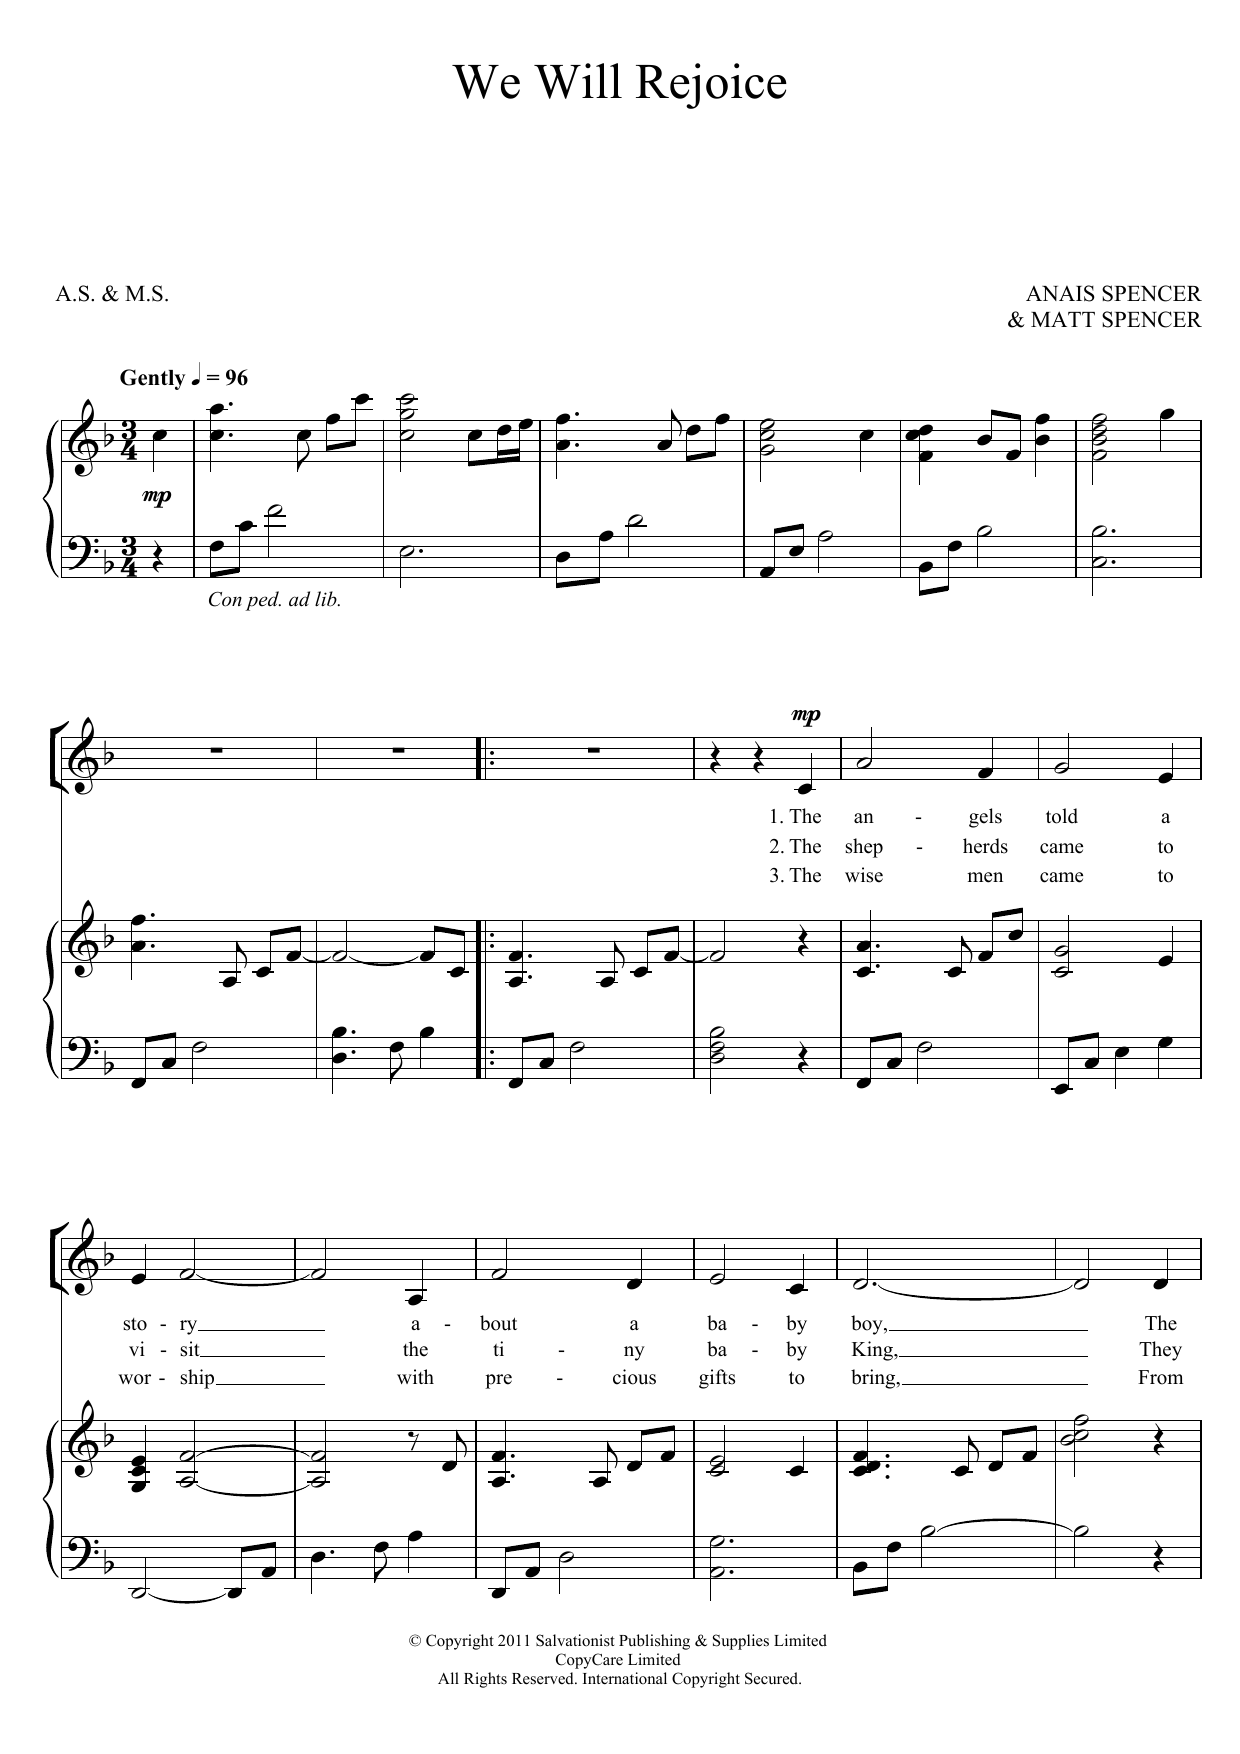 Download The Salvation Army We Will Rejoice Sheet Music